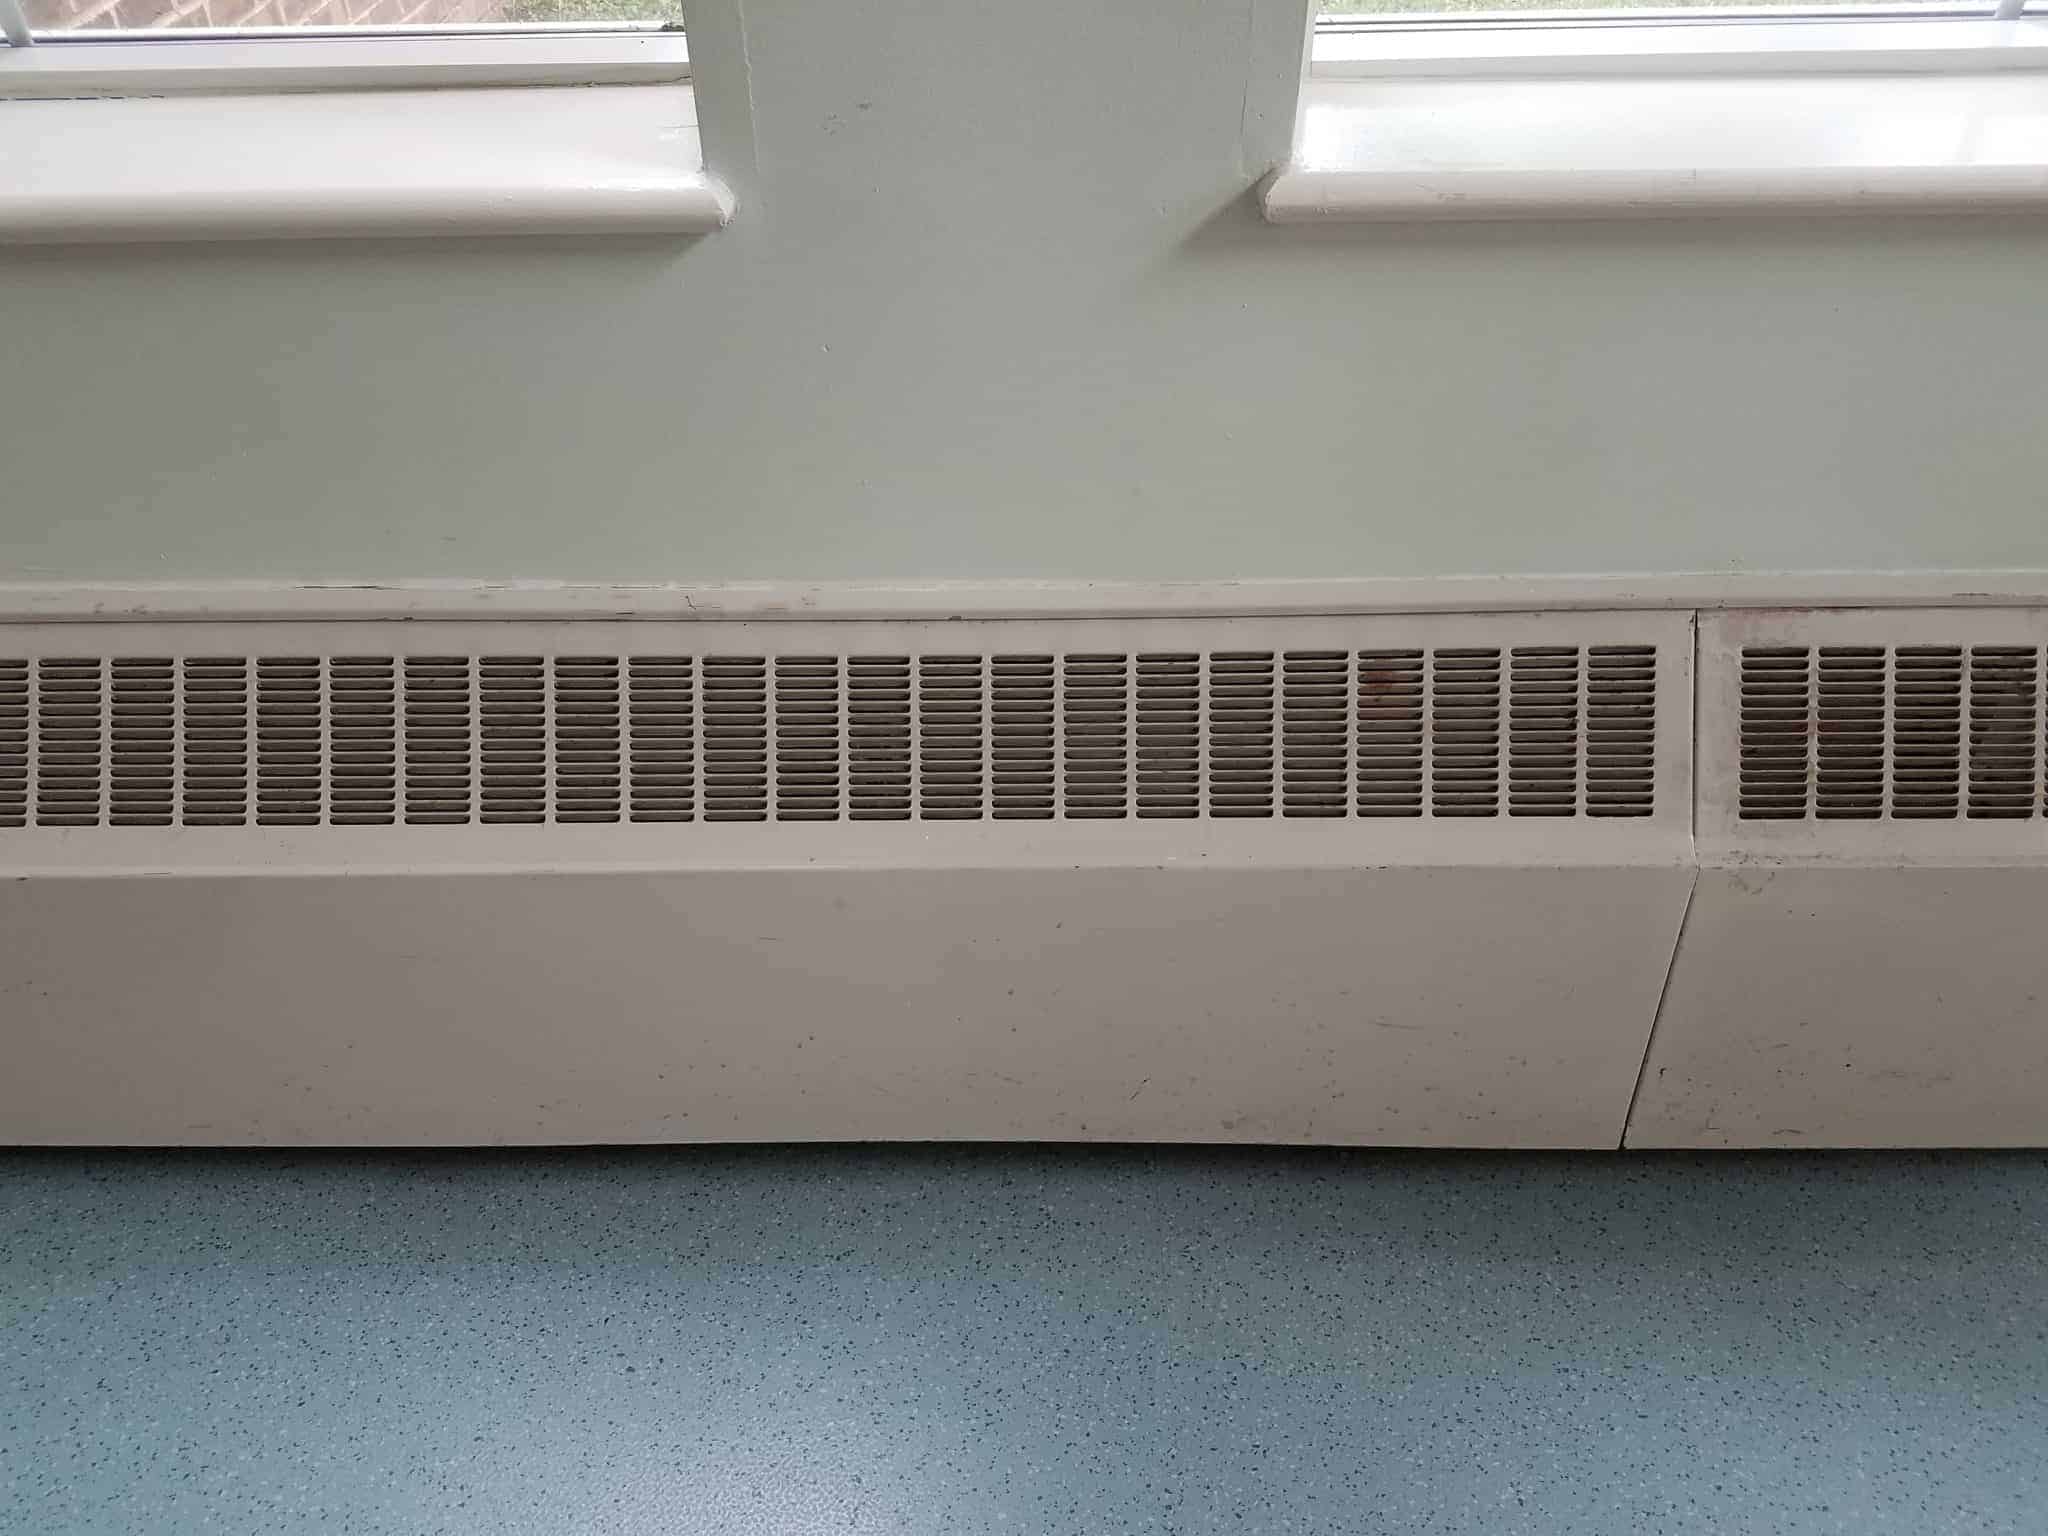 what is the safety clearance for baseboard heaters?